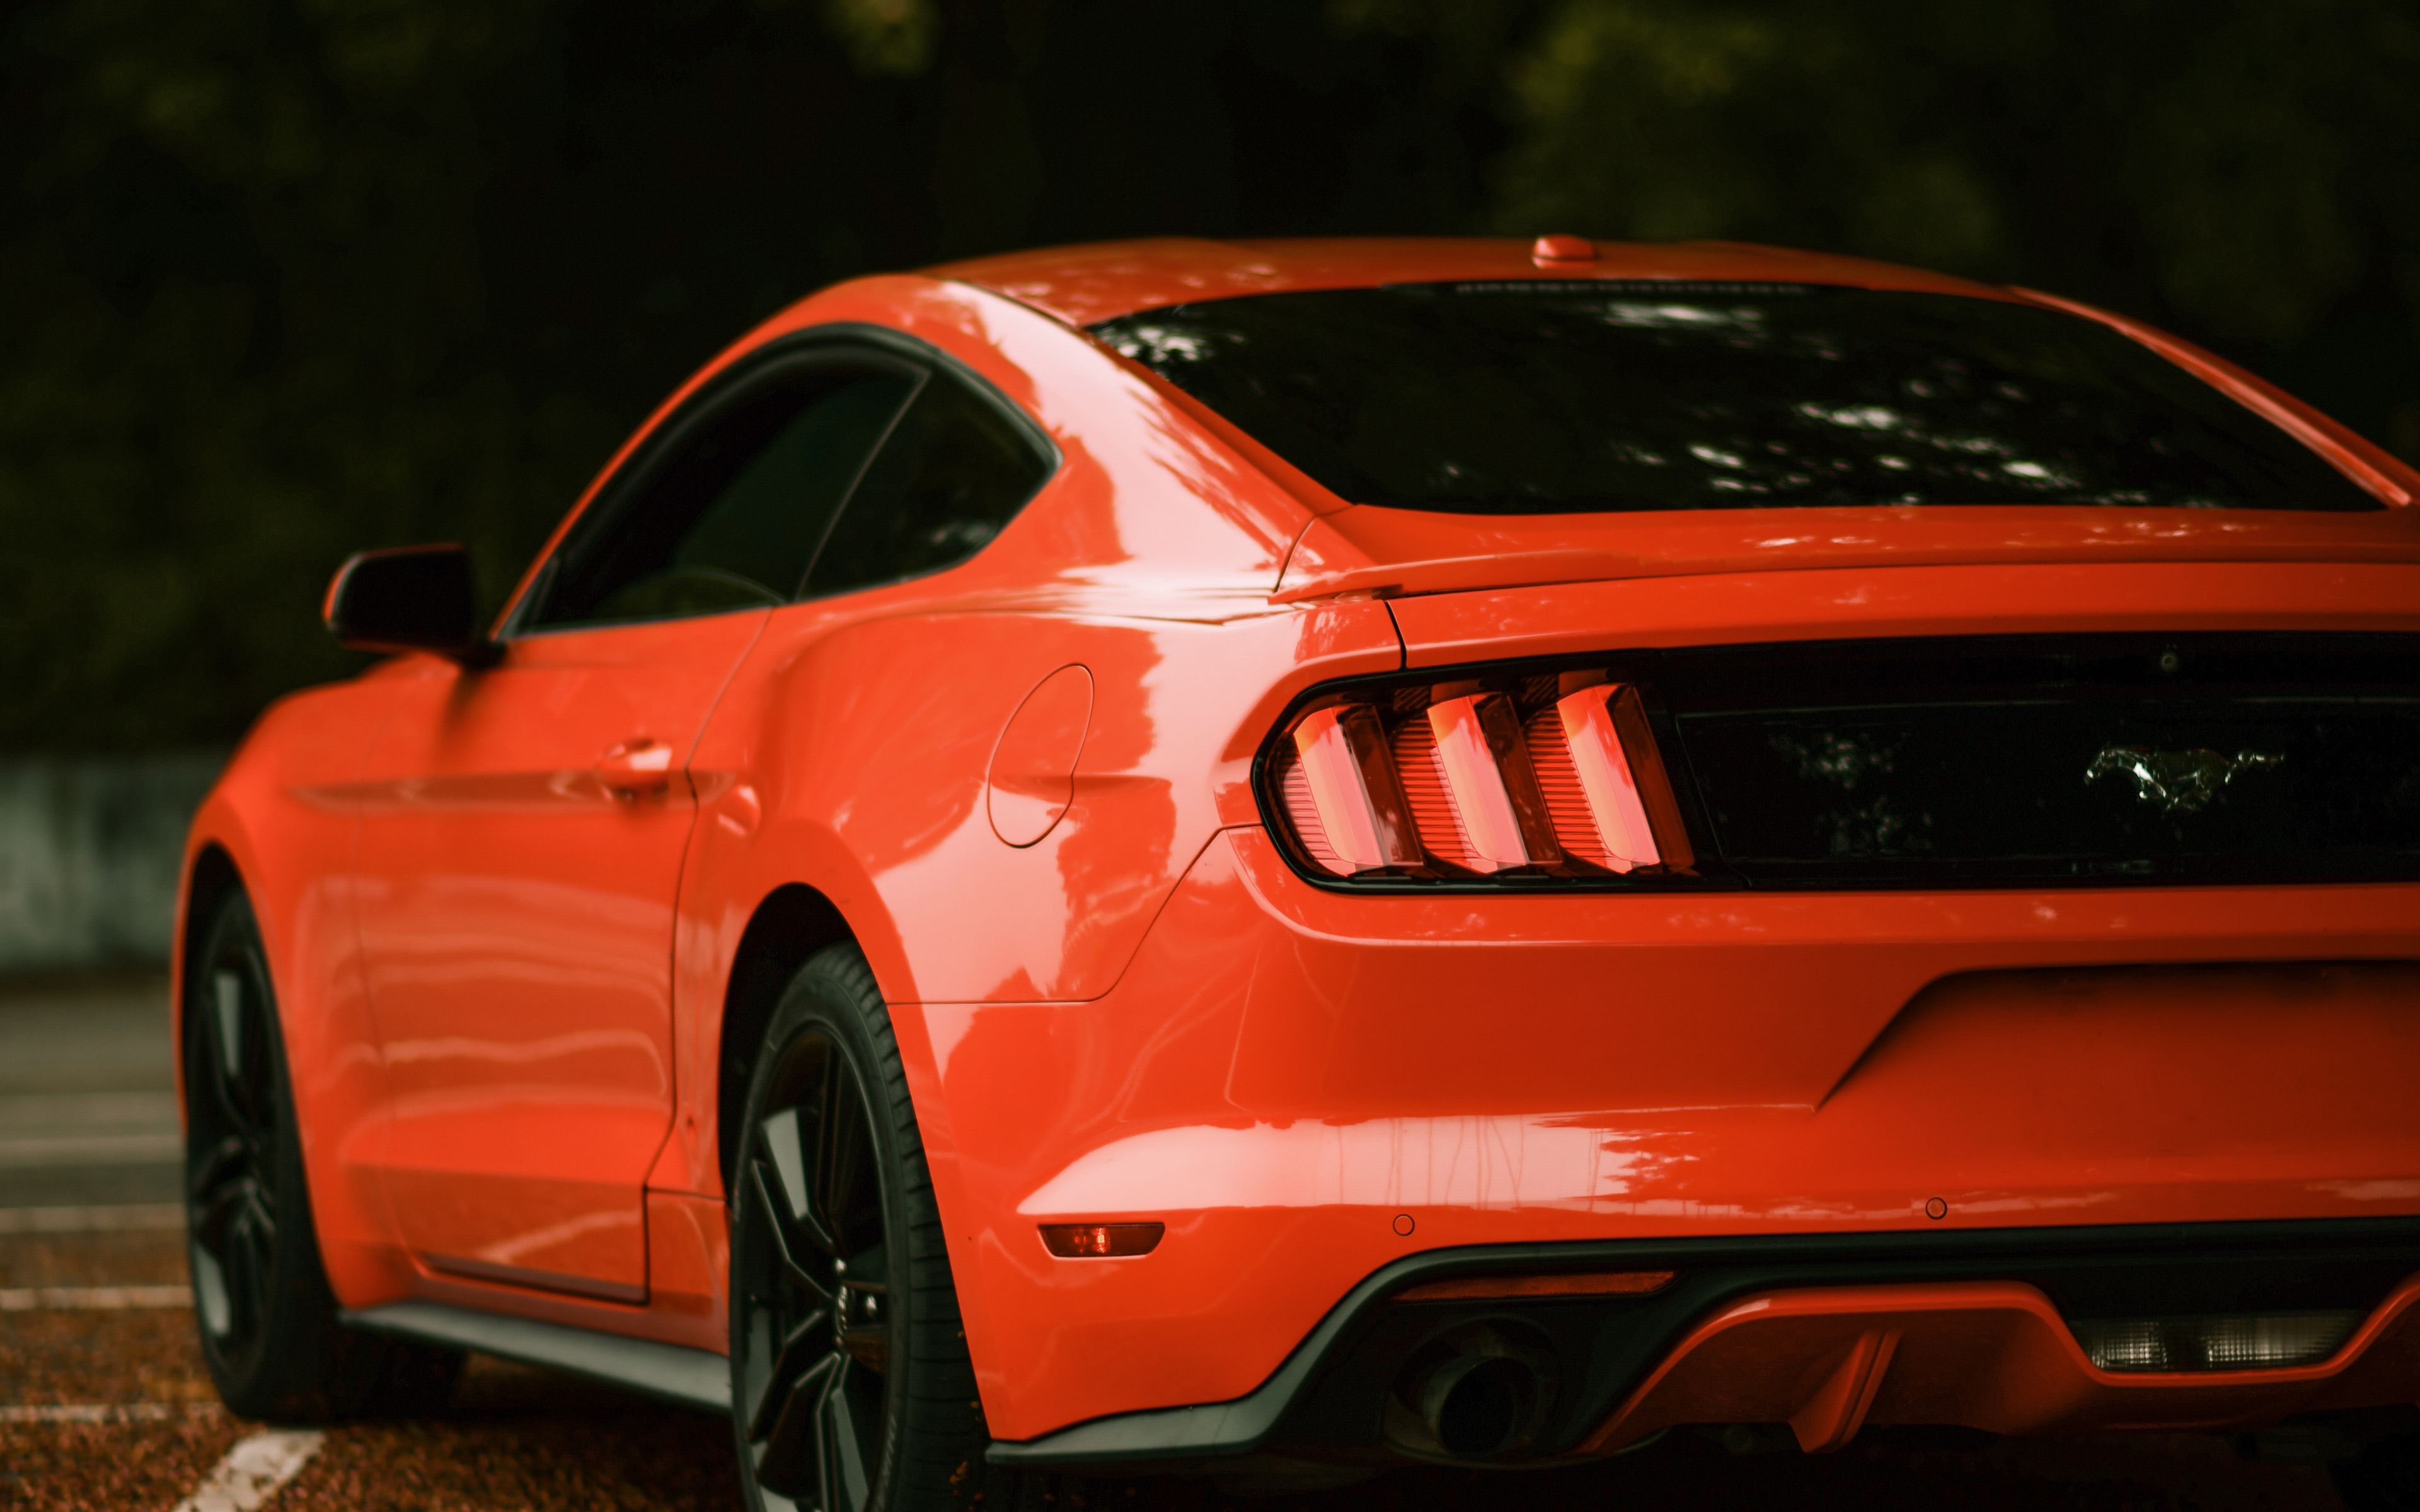 Download wallpaper 3840x2400 ford mustang, ford, car, red, side